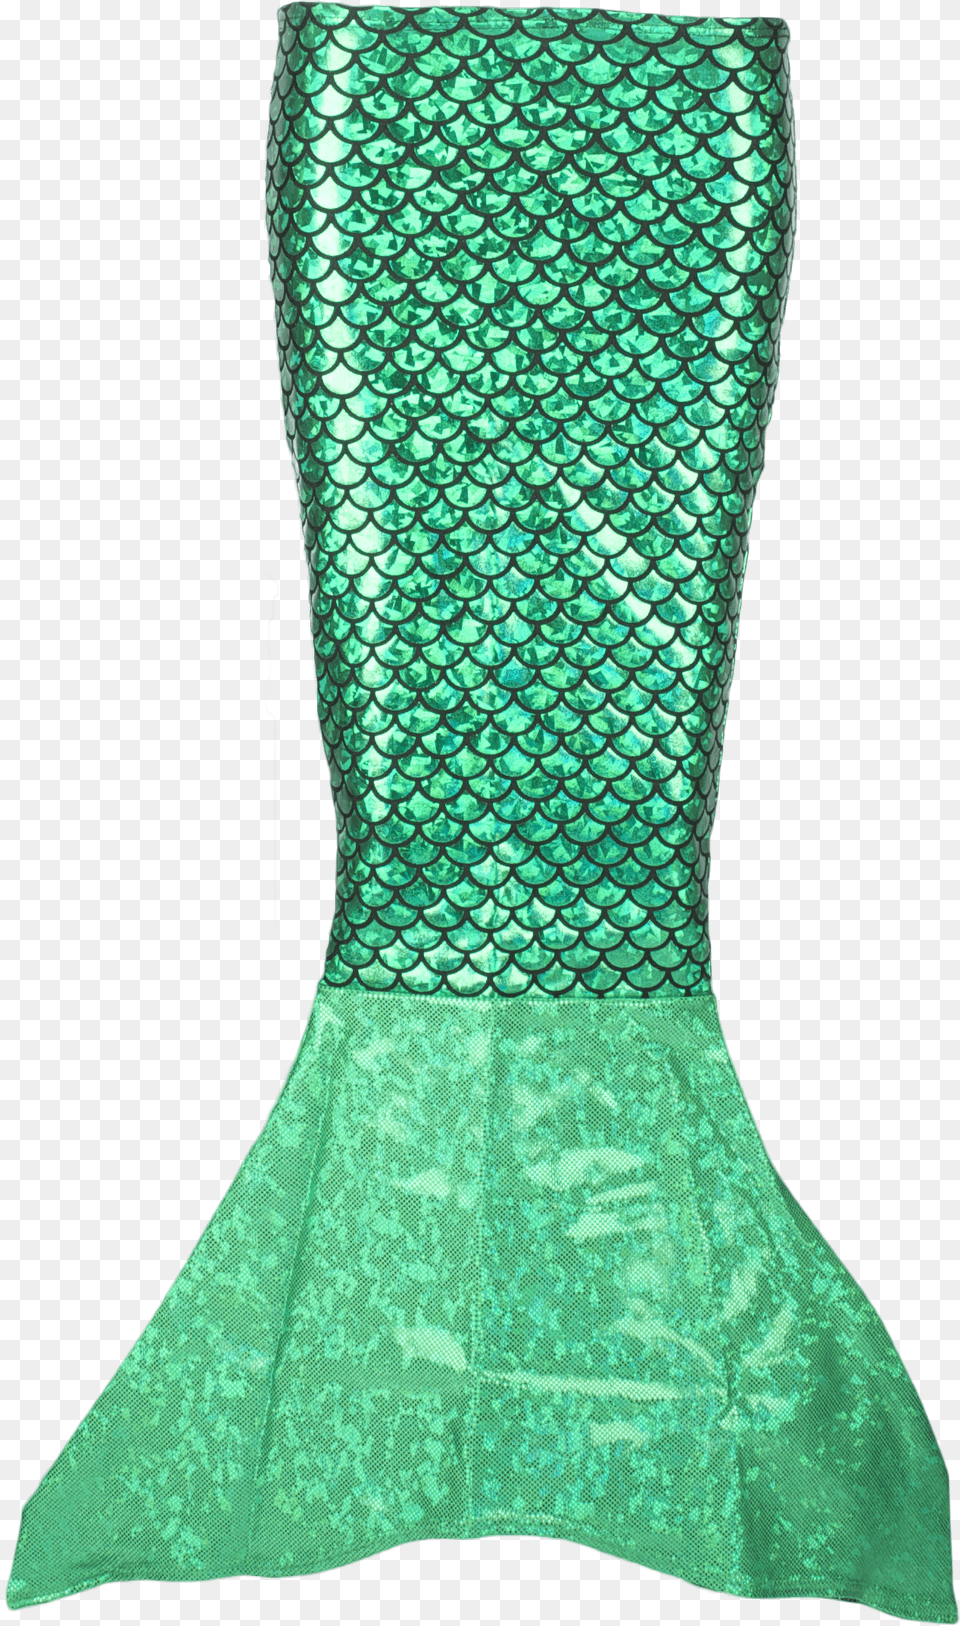 Ariel Mermaid Tail Download Day Dress, Cushion, Home Decor, Adult, Wedding Free Transparent Png